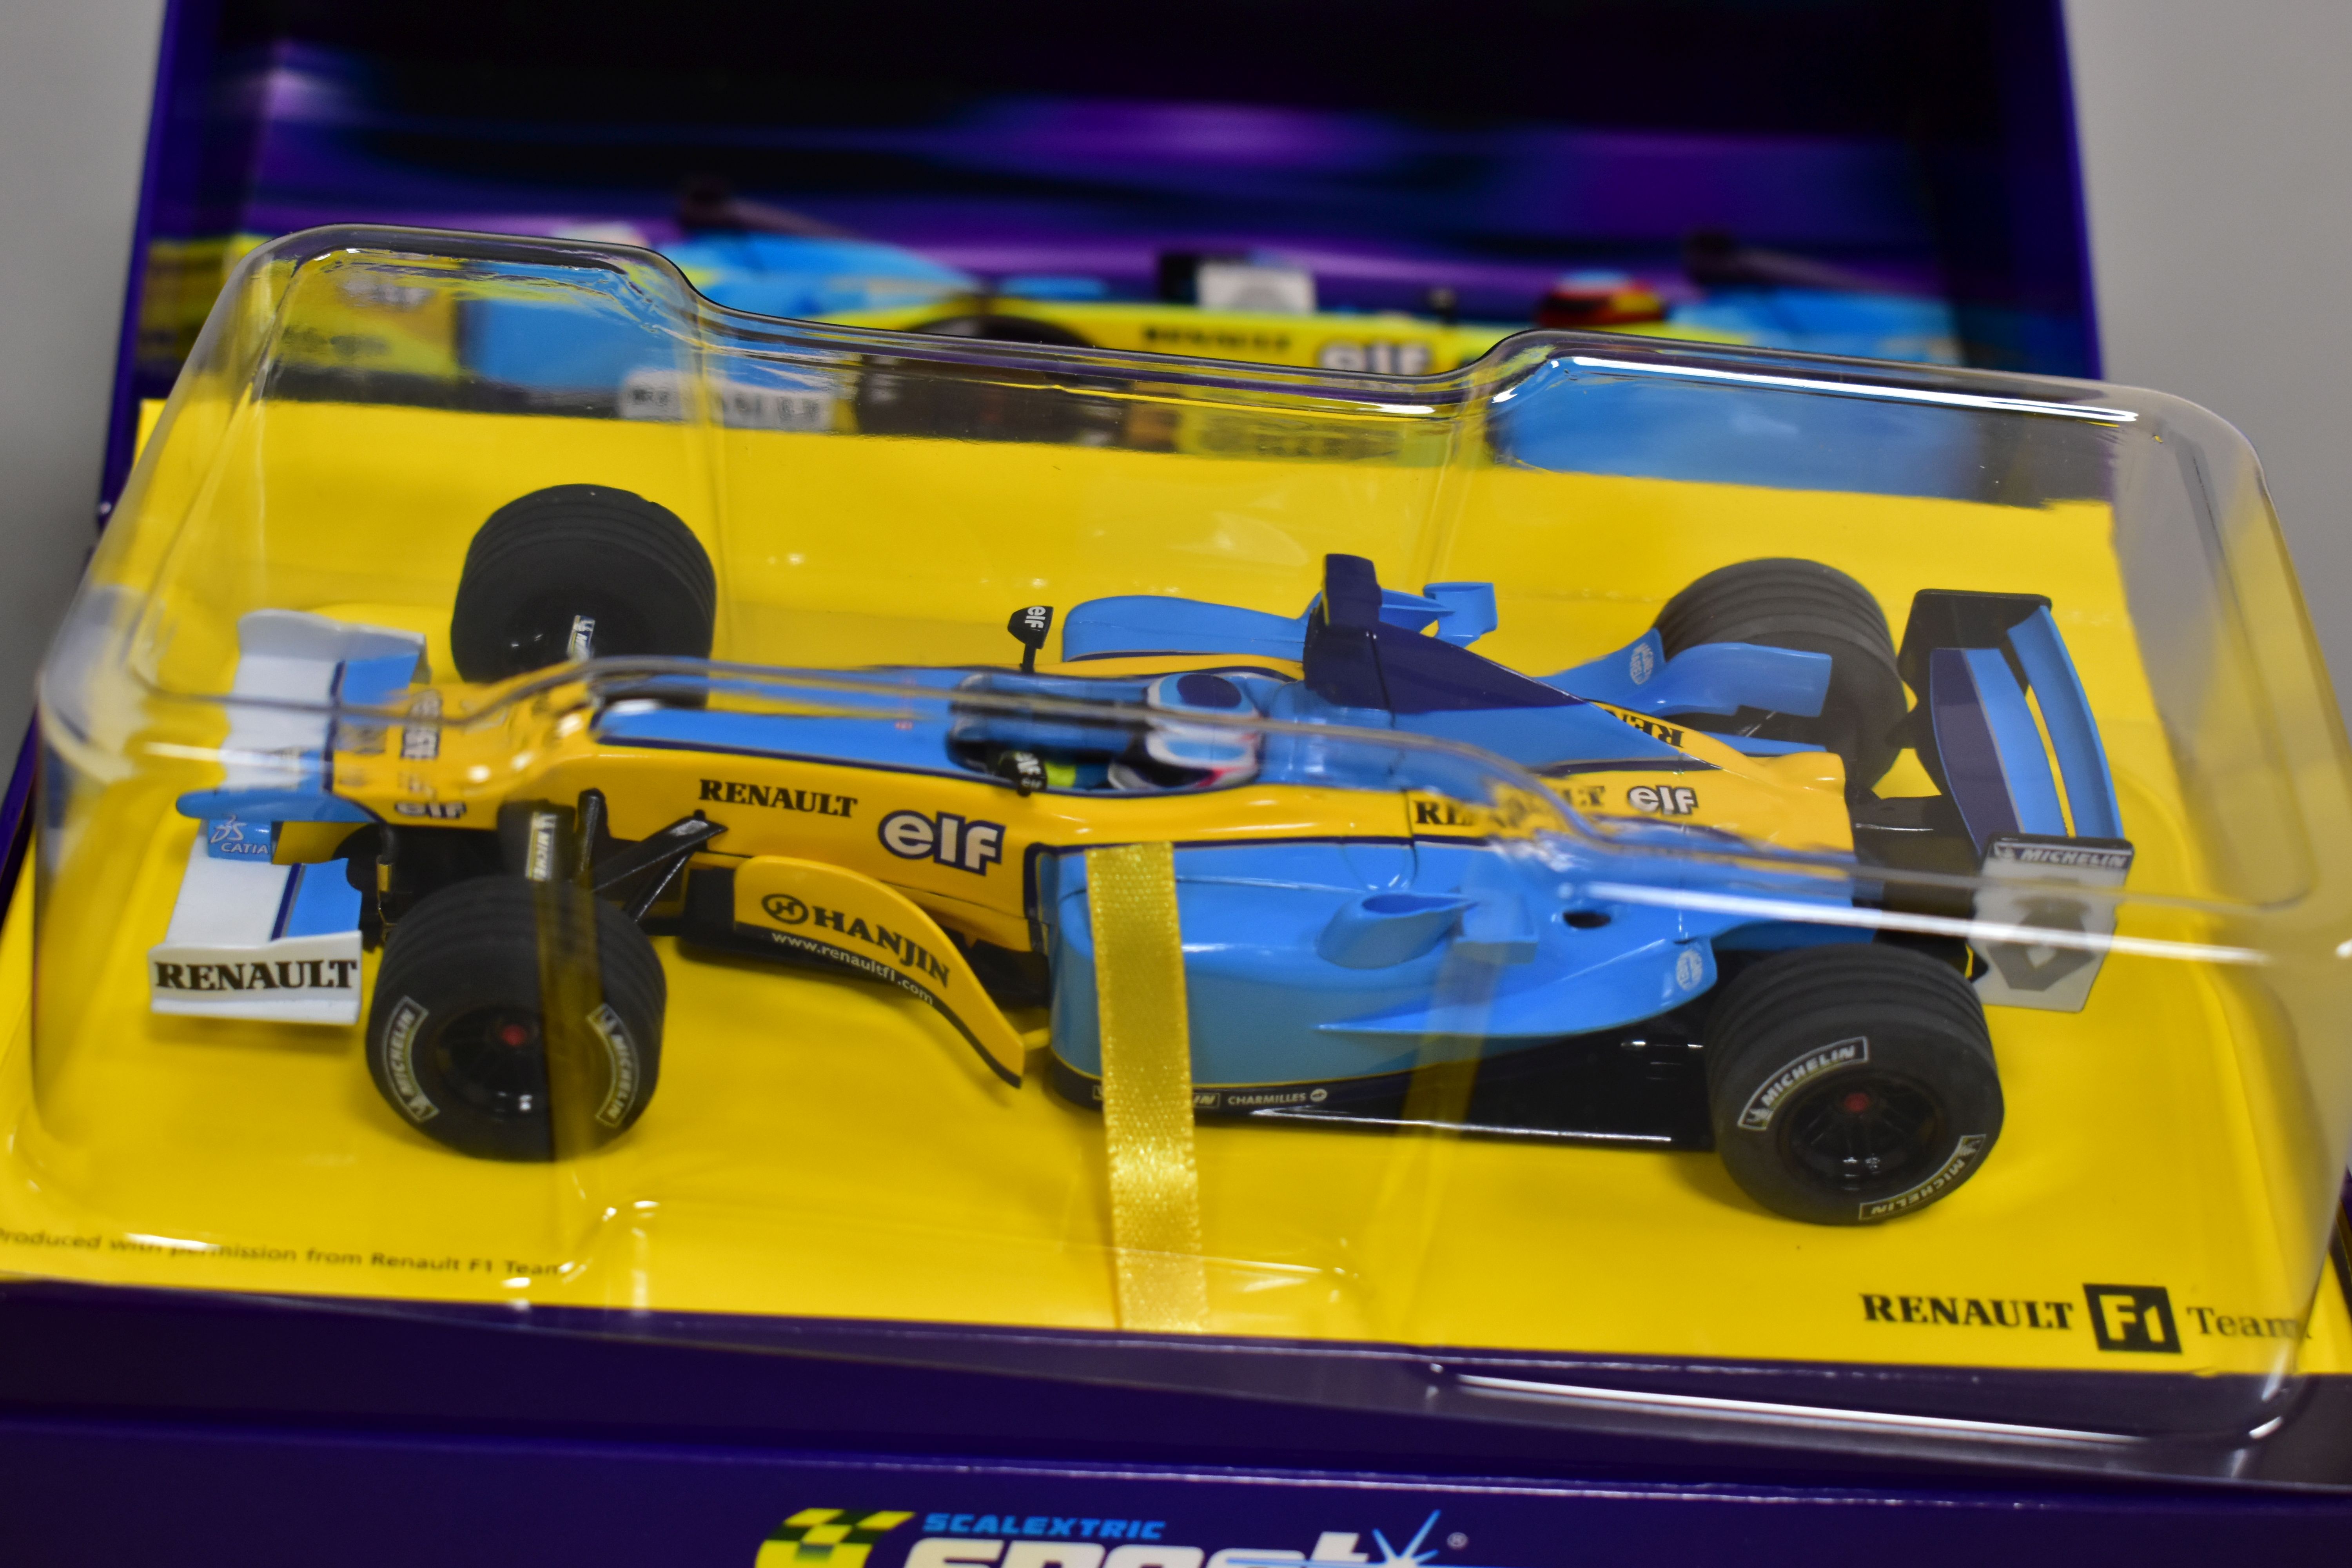 FOUR BOXED SCALEXTRIC F1 RACING CAR MODELS, Scalextric Sport Limited Edition Renault R23 F1 Jarno - Image 3 of 5